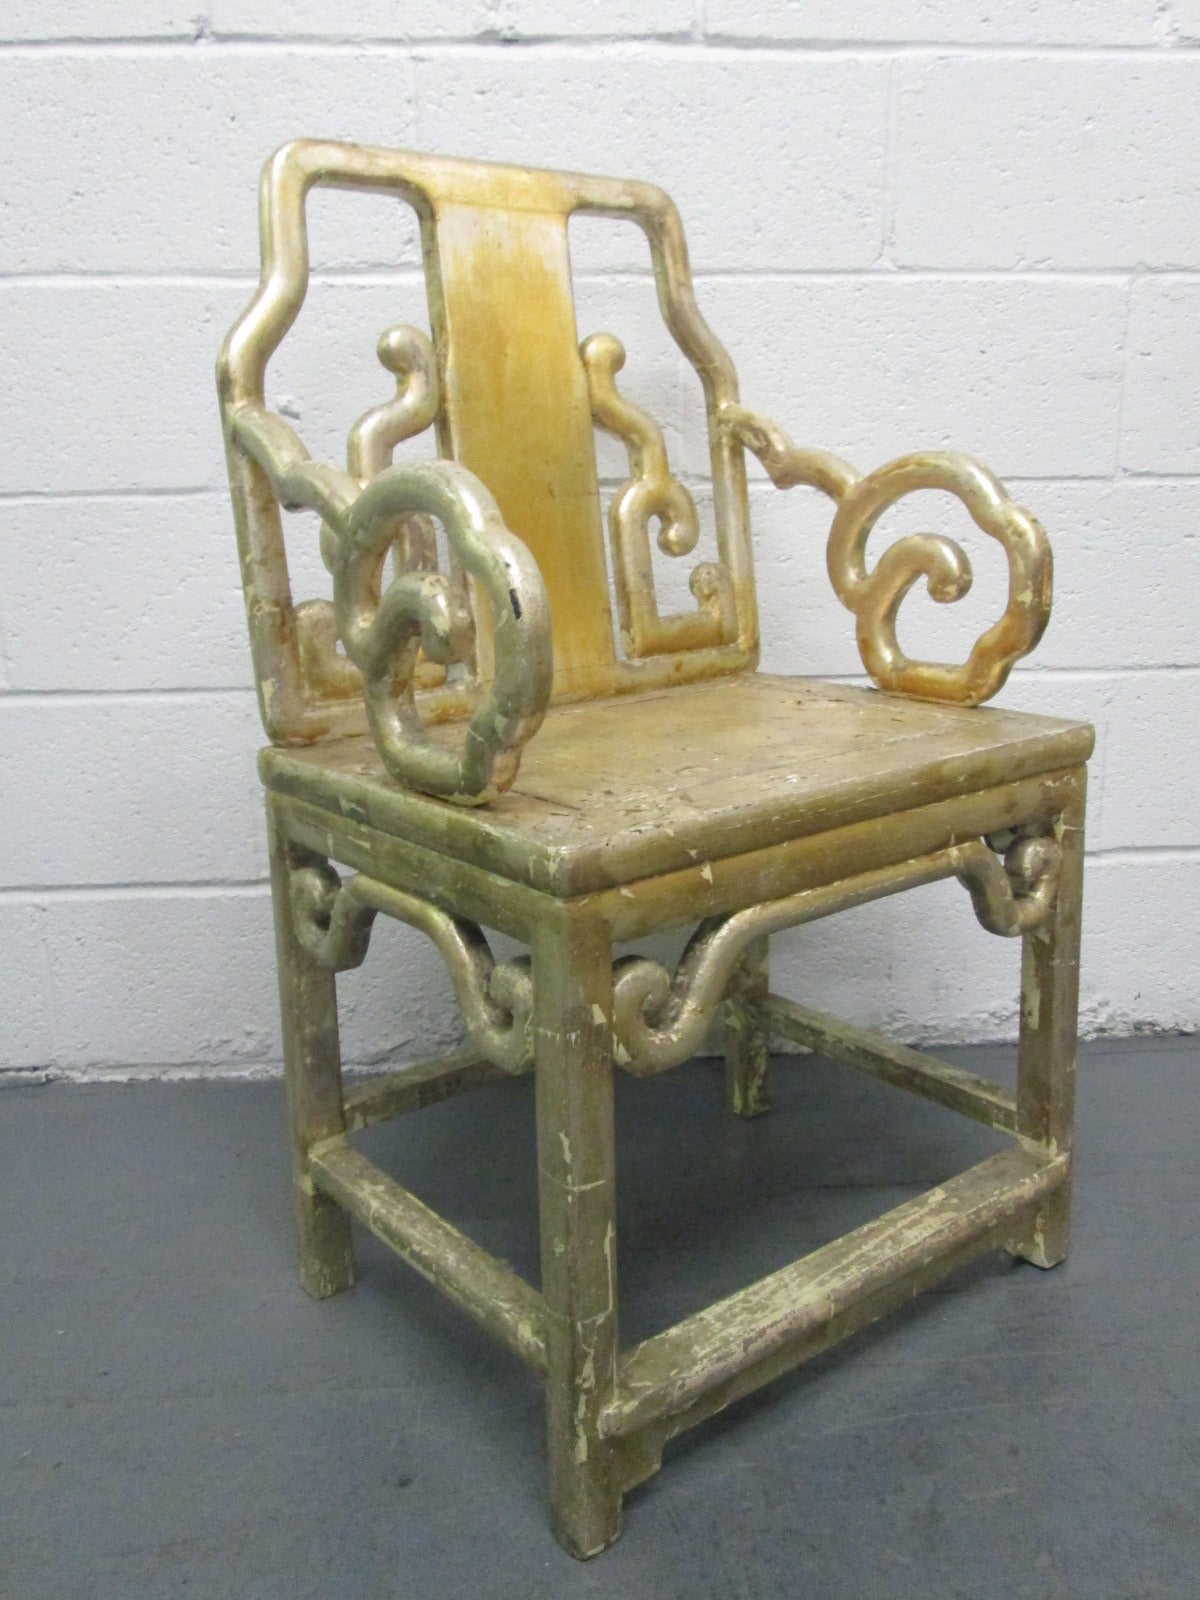 Set of four gilt hardwood Chinese armchairs. Very decorative with a nice look.